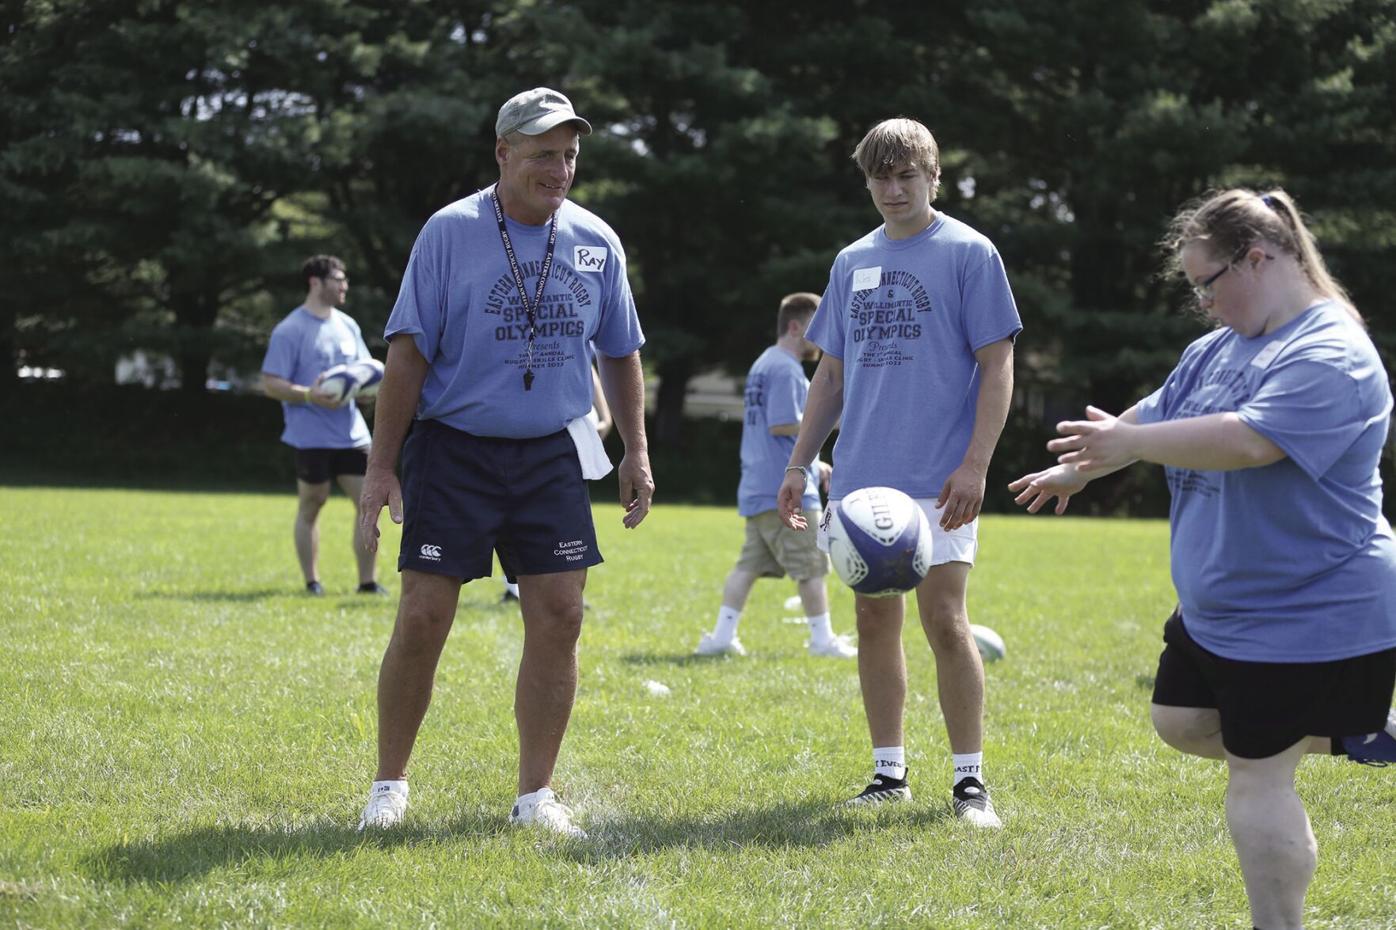 CommUNITY Crew Hosts Skills Clinic for Special Olympics